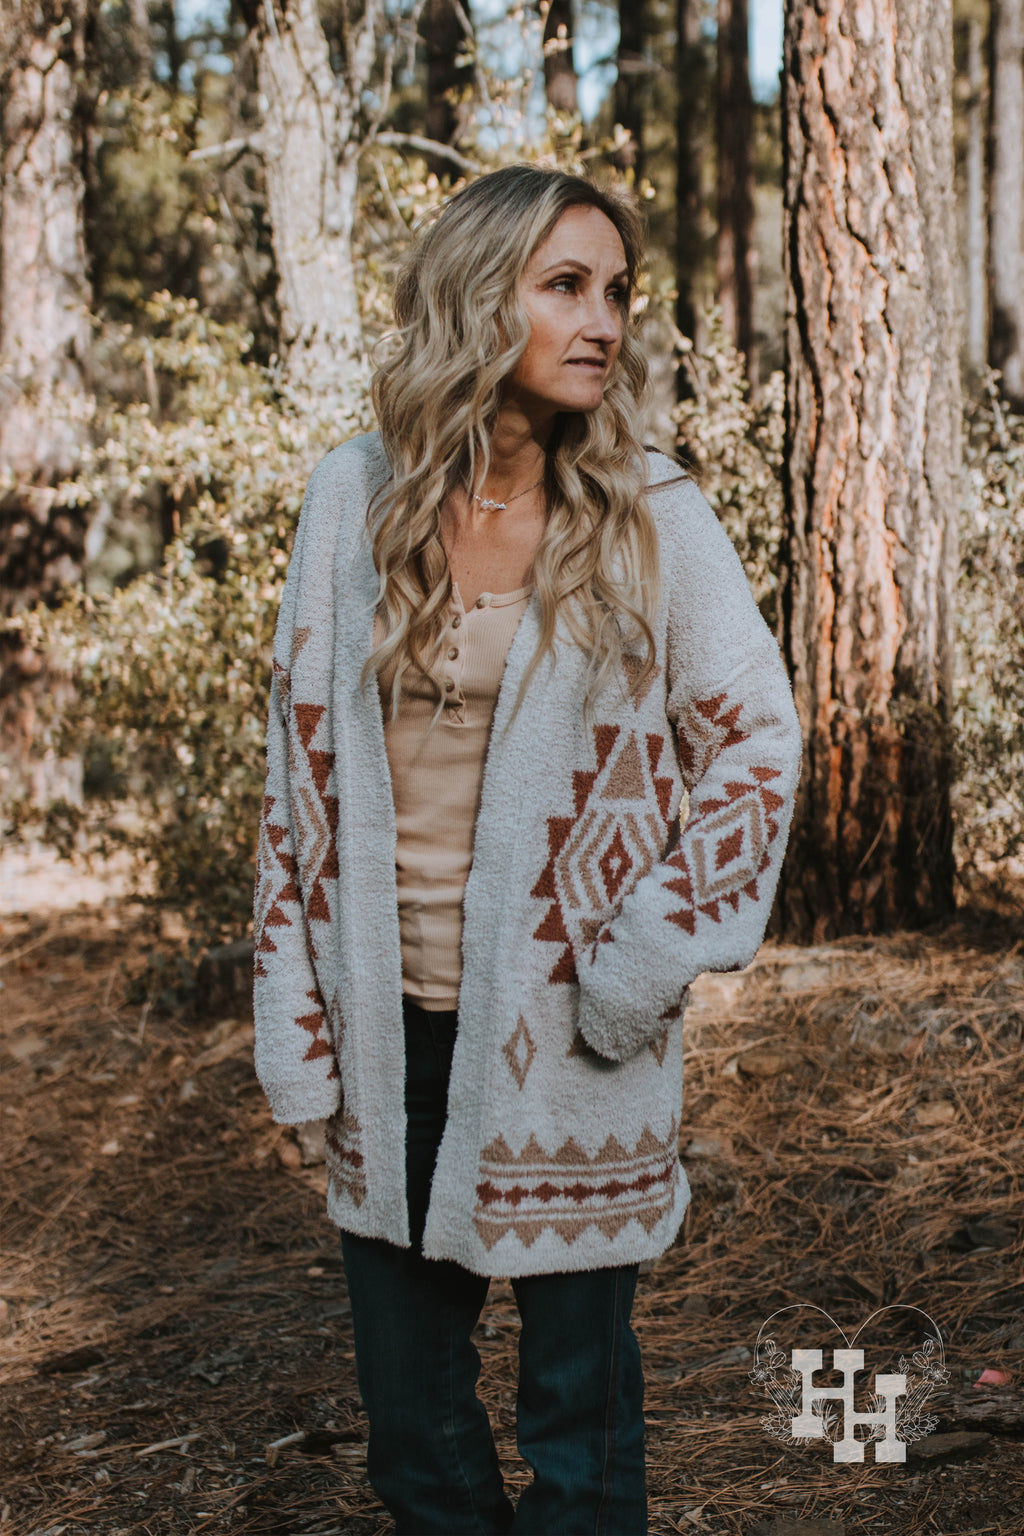 Girl wearing a long soft cardigan. The cardigan is offwhite with an aztec patern on it. The aztec pattern is a burnt orange and tan color. Cardigan lenght is about to her upper thigh. She is also wearing jeans and a tan colored tank. 